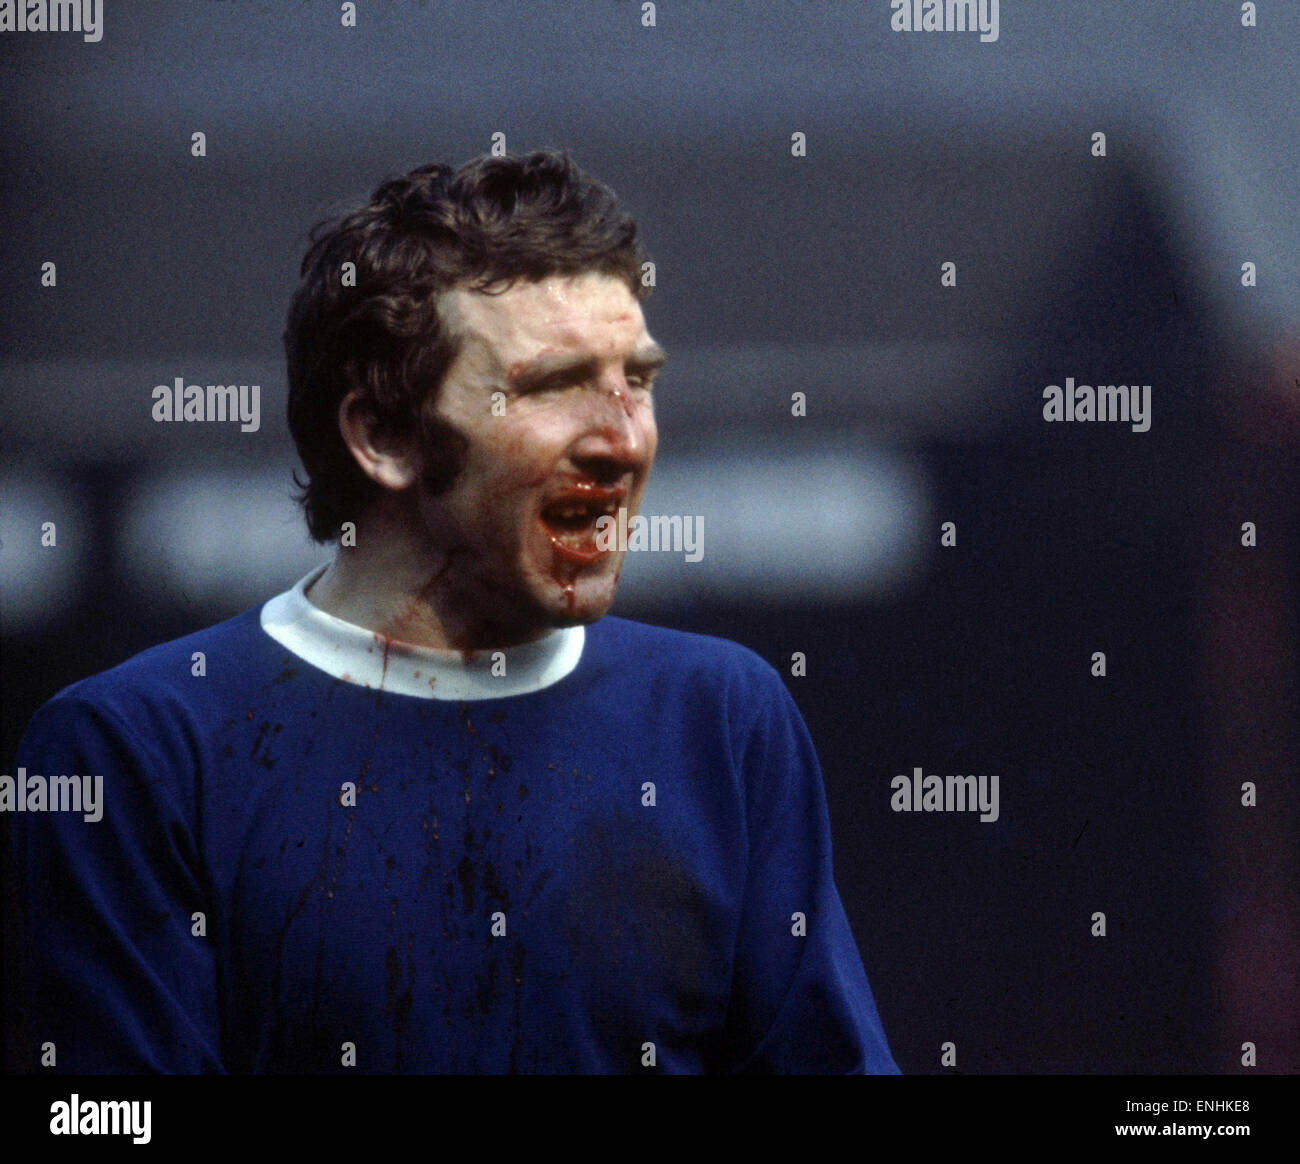 FA Cup Semi Final match at Old Trafford, Manchester. Liverpool 2 v Everton 1. John Morrisey with his face covered in blood after a goalmouth collision. 27th March 1971. Stock Photo